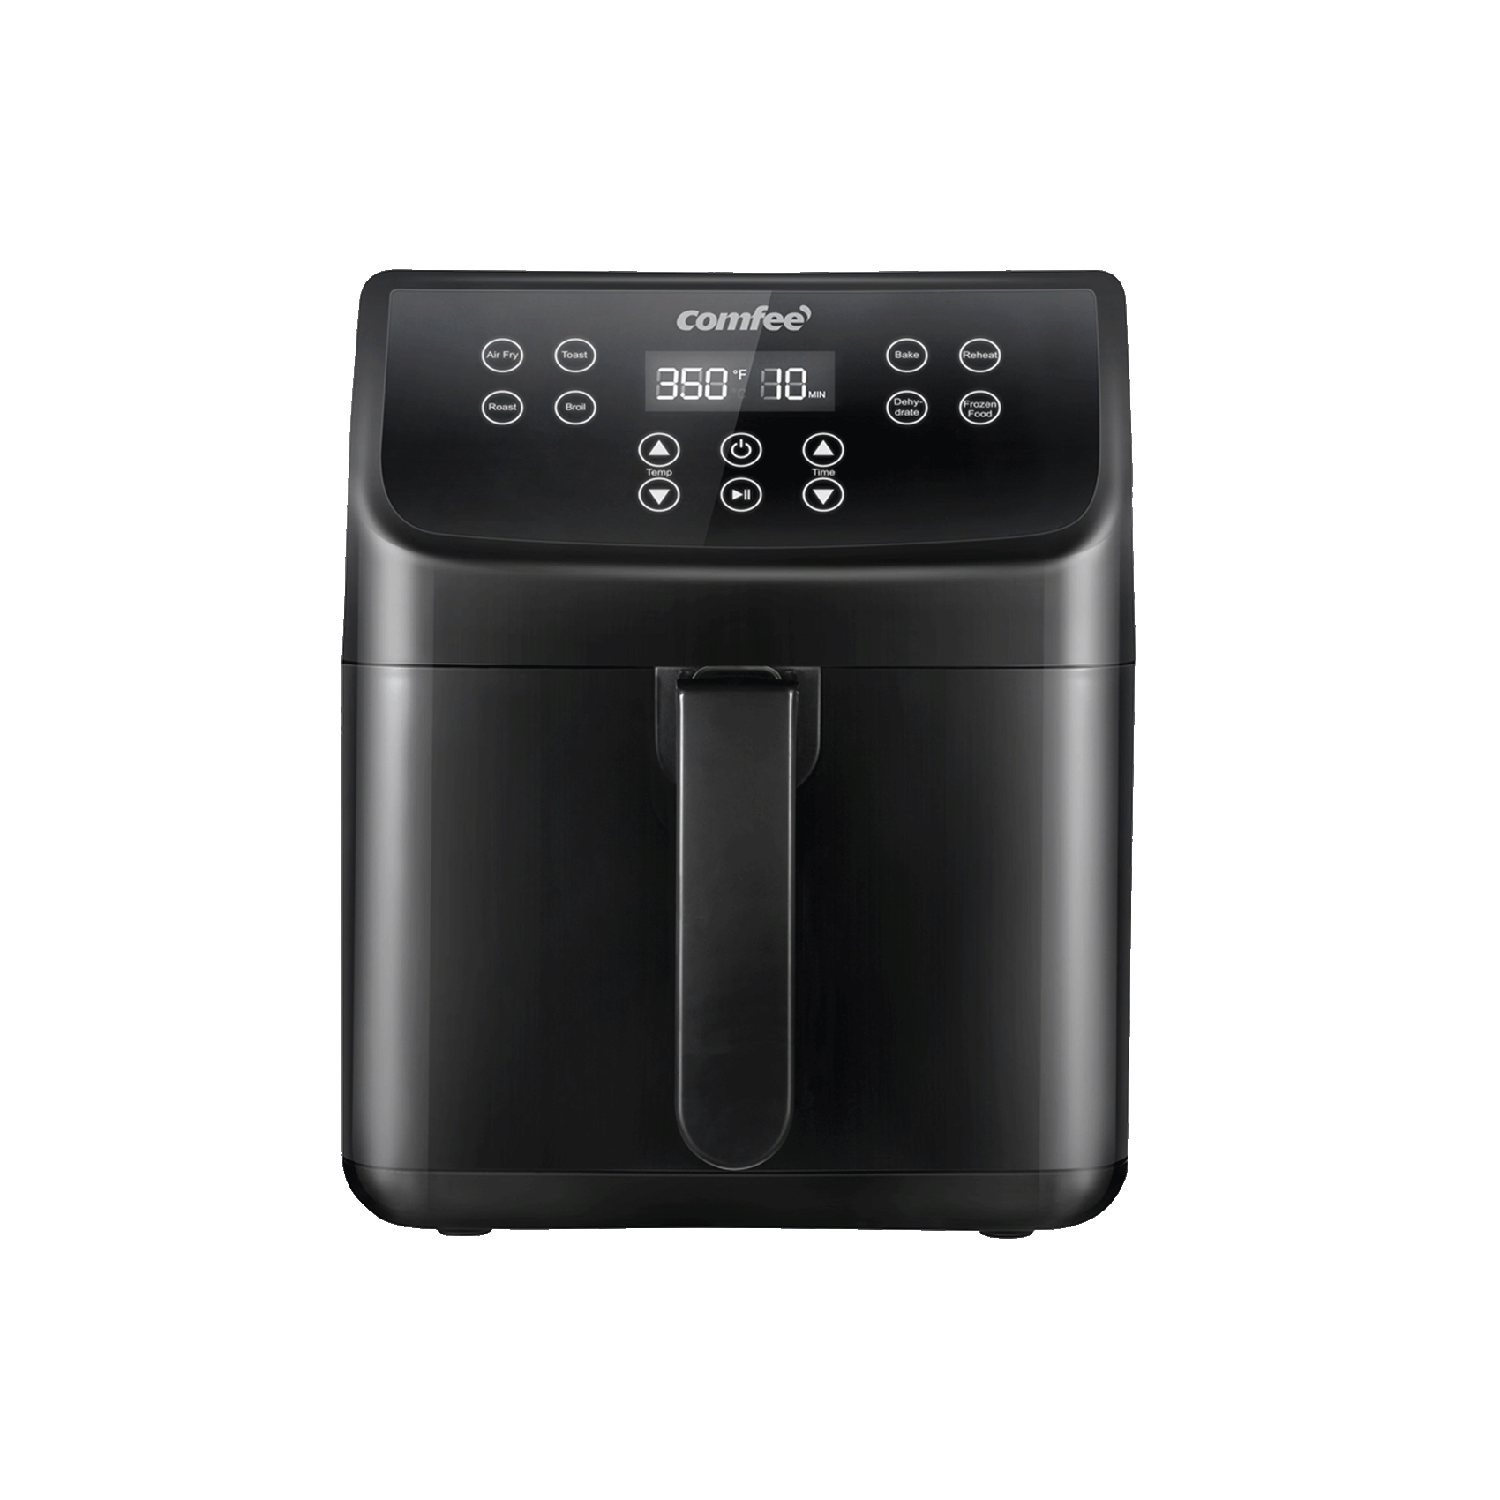 https://d1pjg4o0tbonat.cloudfront.net/content/dam/comfee-aem/global/products/small-appliances/digital-air-fryer-toaster-oven-oilless-cooker/kv1.png/jcr:content/renditions/cq5dam.compression.png